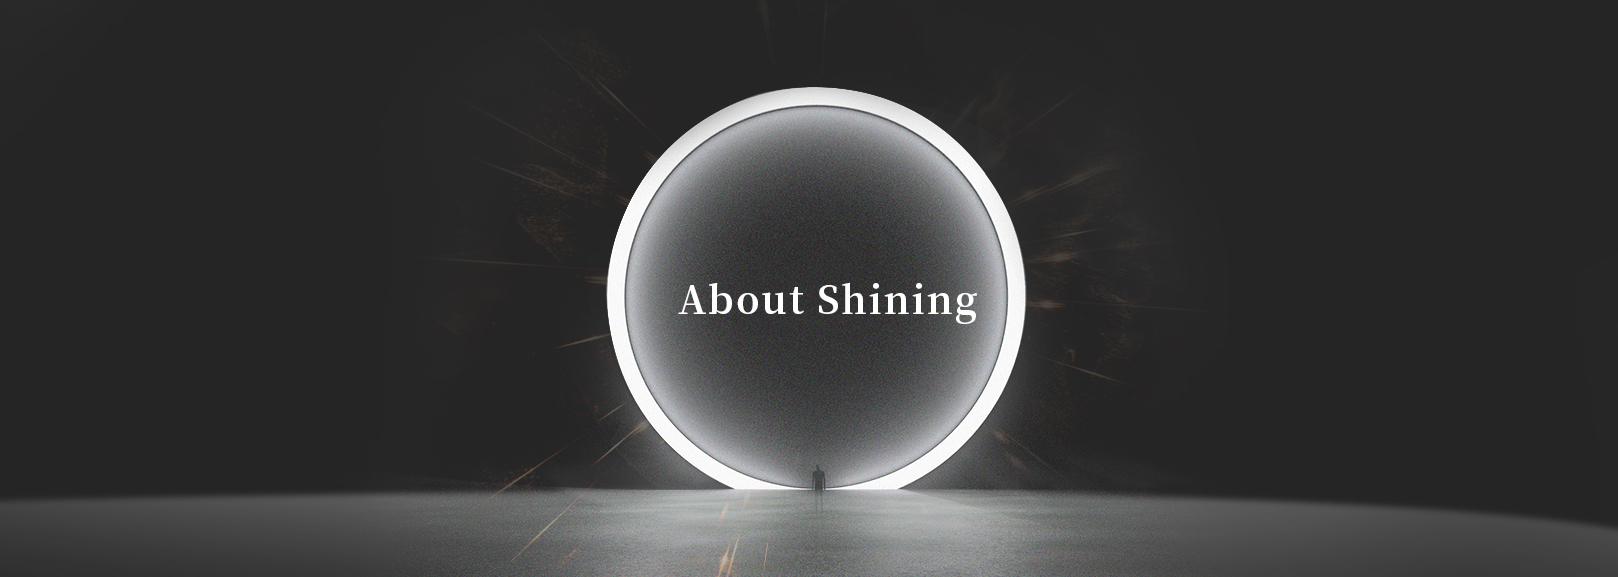 About Shining